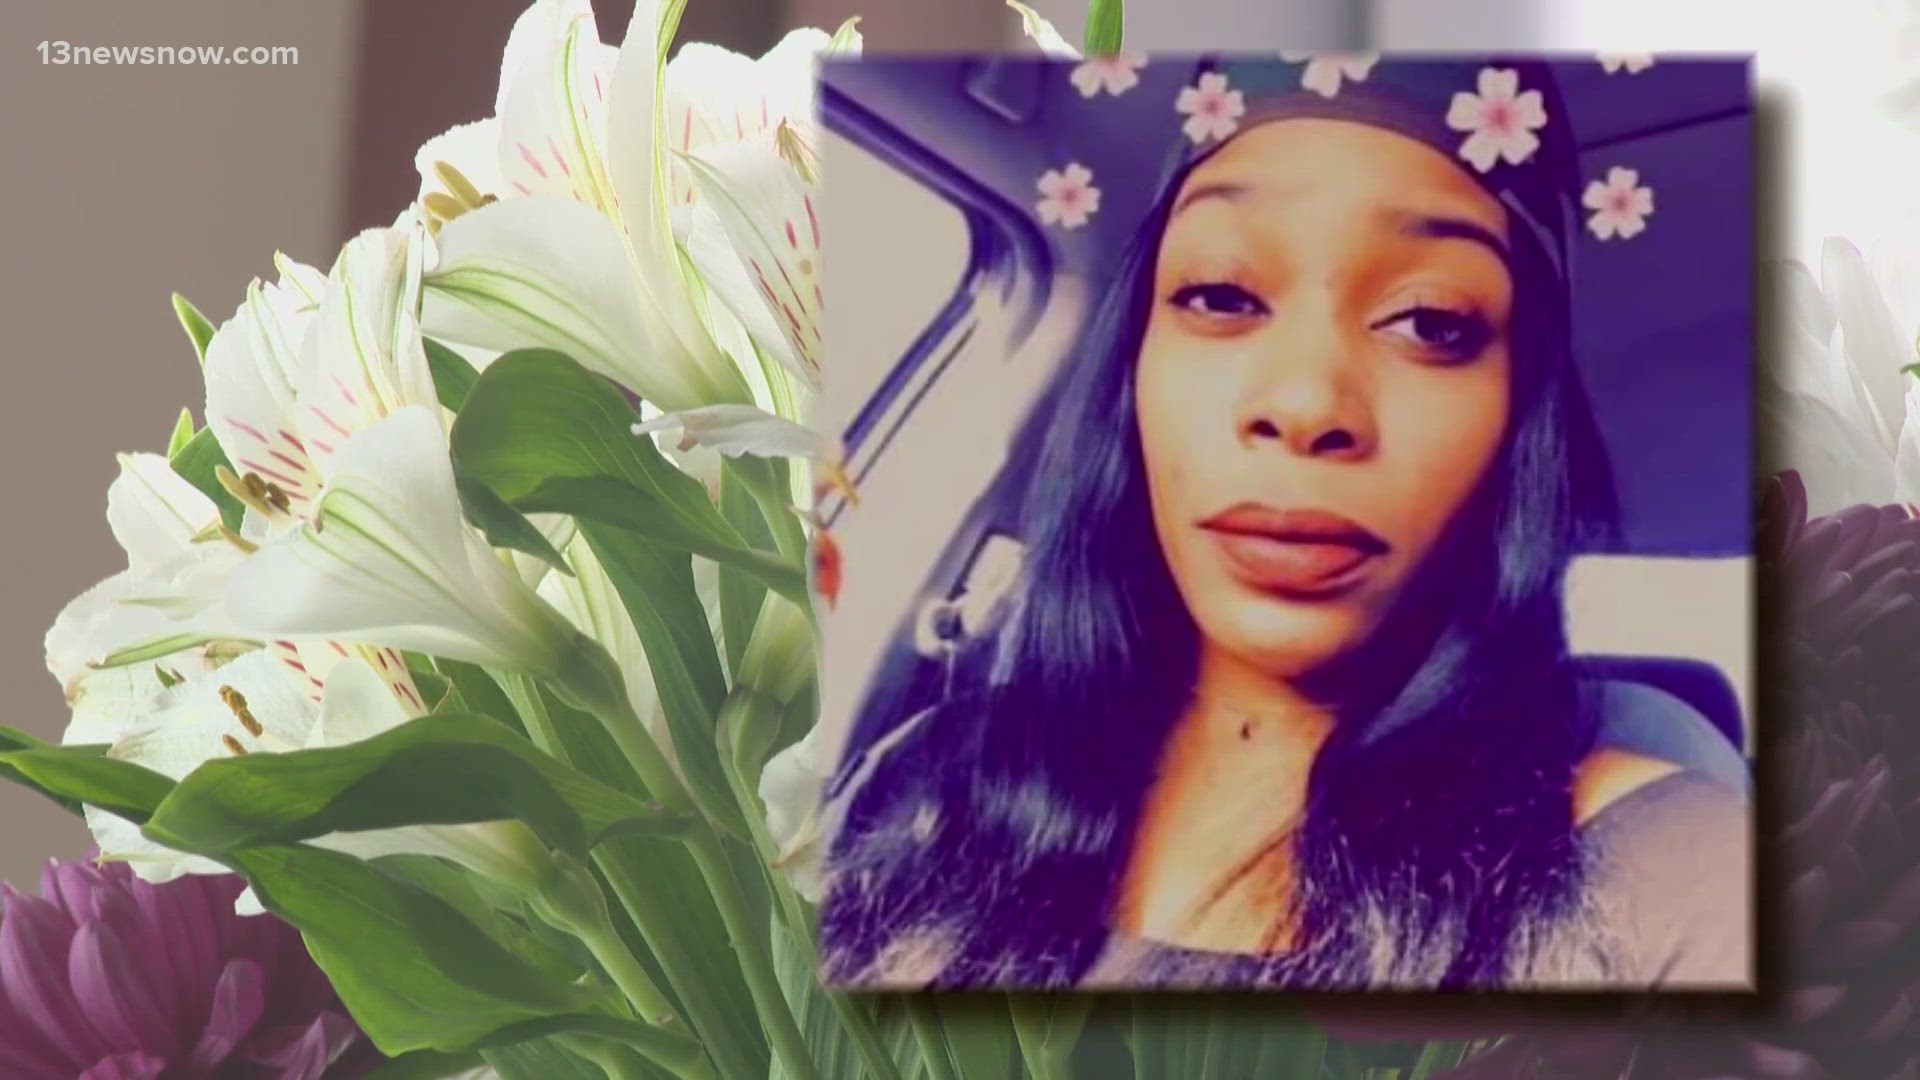 31-year-old Erica Atkins was killed in the Friday night shooting on Dale Drive.  She's the niece of Stop the Violence 757 founder Monica Atkins.